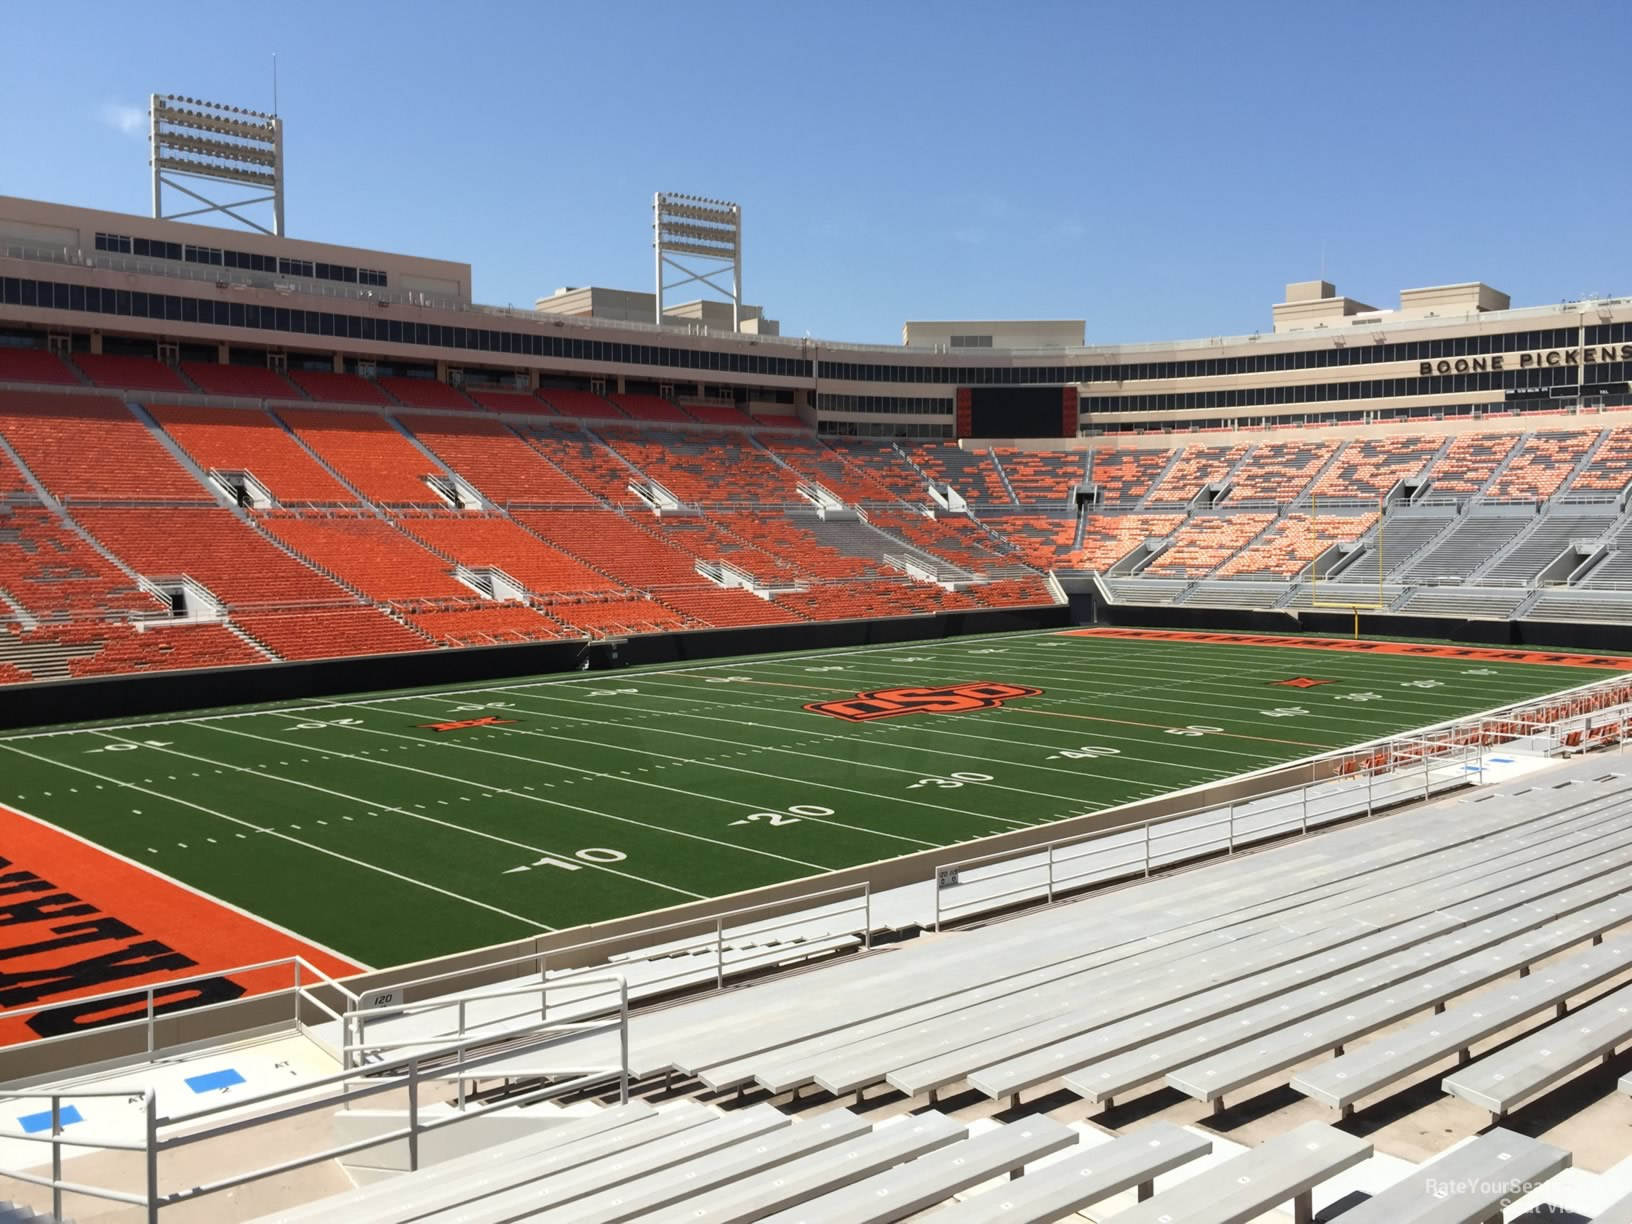 section 228, row 20 seat view  - boone pickens stadium